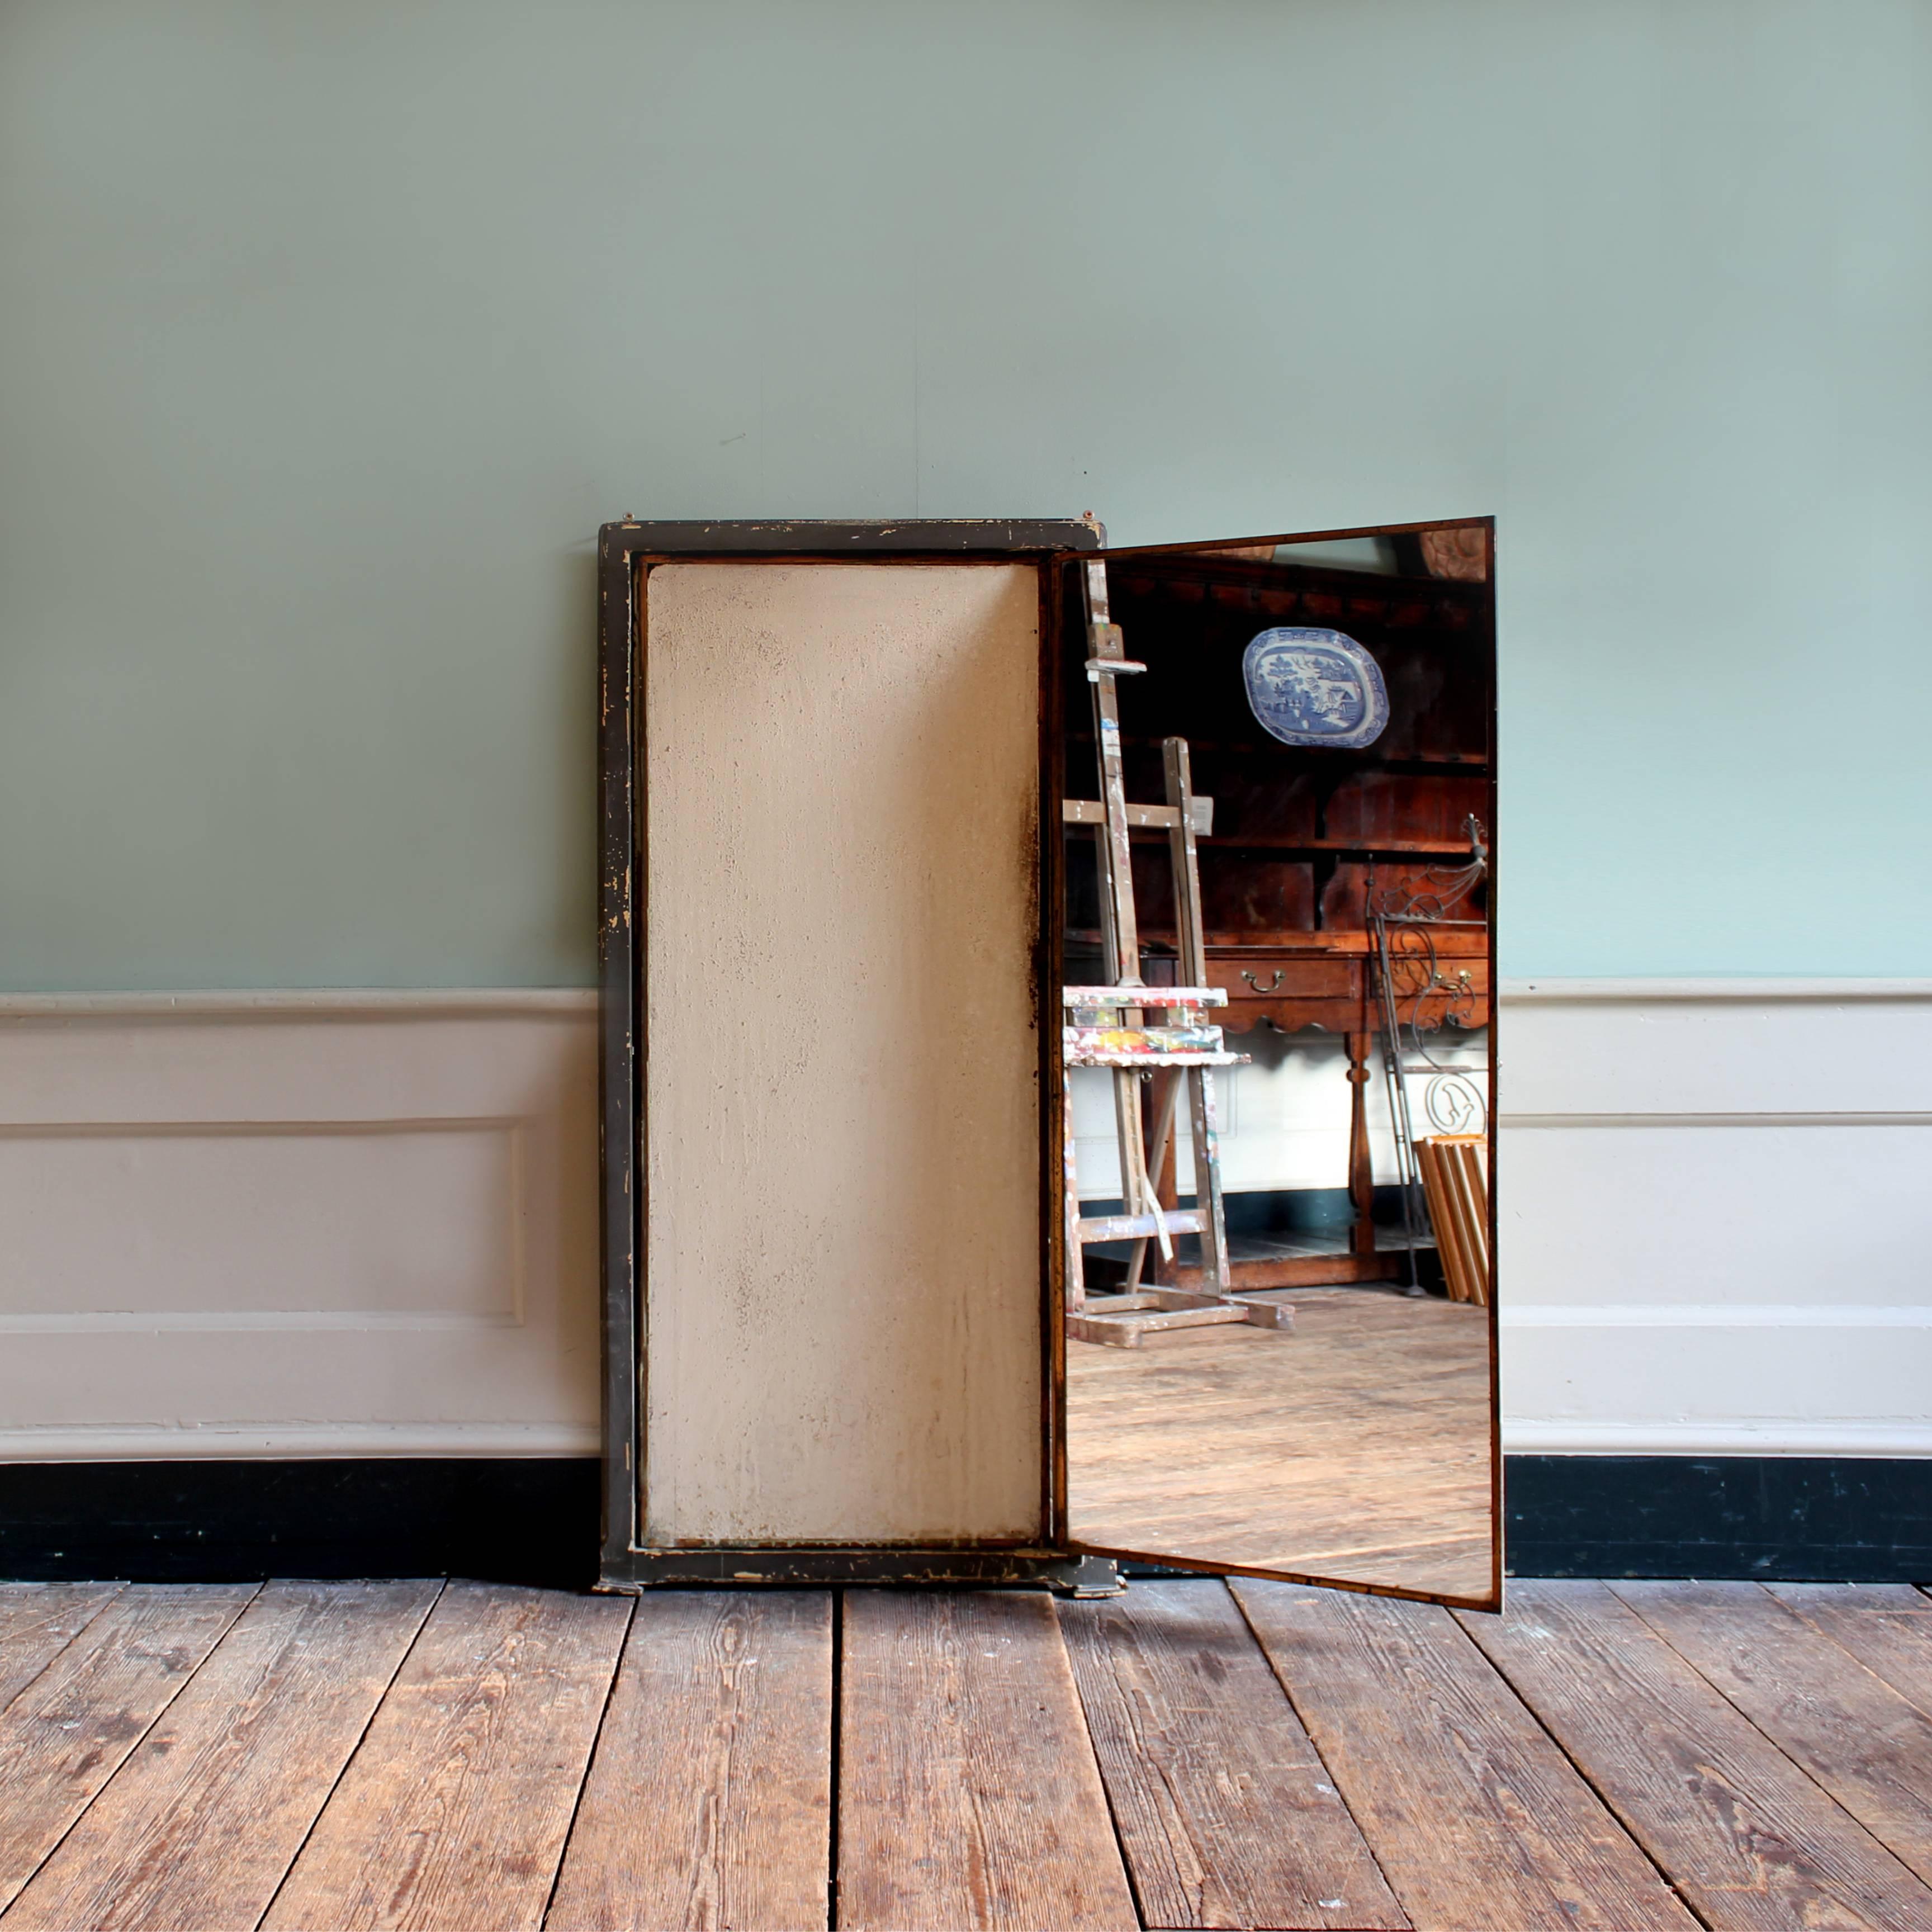 A French tailor's mirror, late nineteenth or early twentieth century by Brot of Paris, the three brass trimmed mirrors folding into plain painted case, raised on shaped feet.

Available to view at Brunswick House, London.

Height 141cm, width